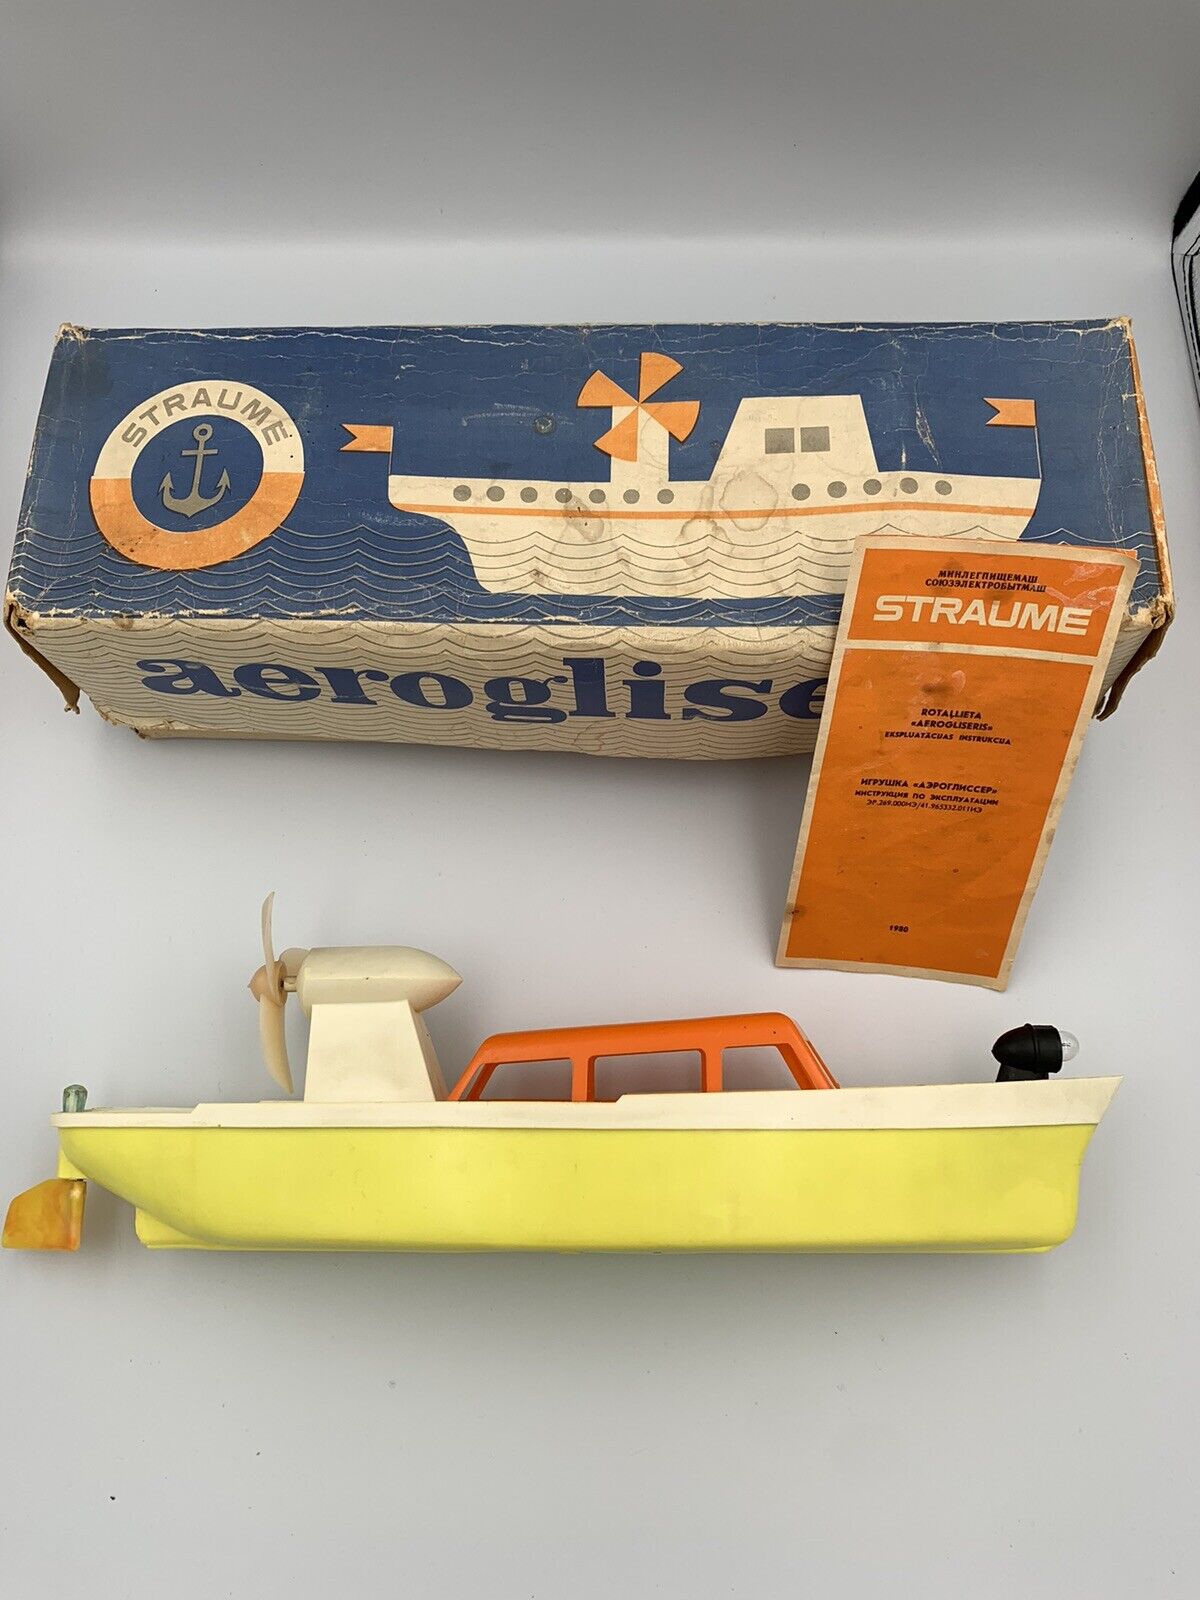 Vintage Very Rare Toy Boat with Battery Power Glisser Straume USSR in Box